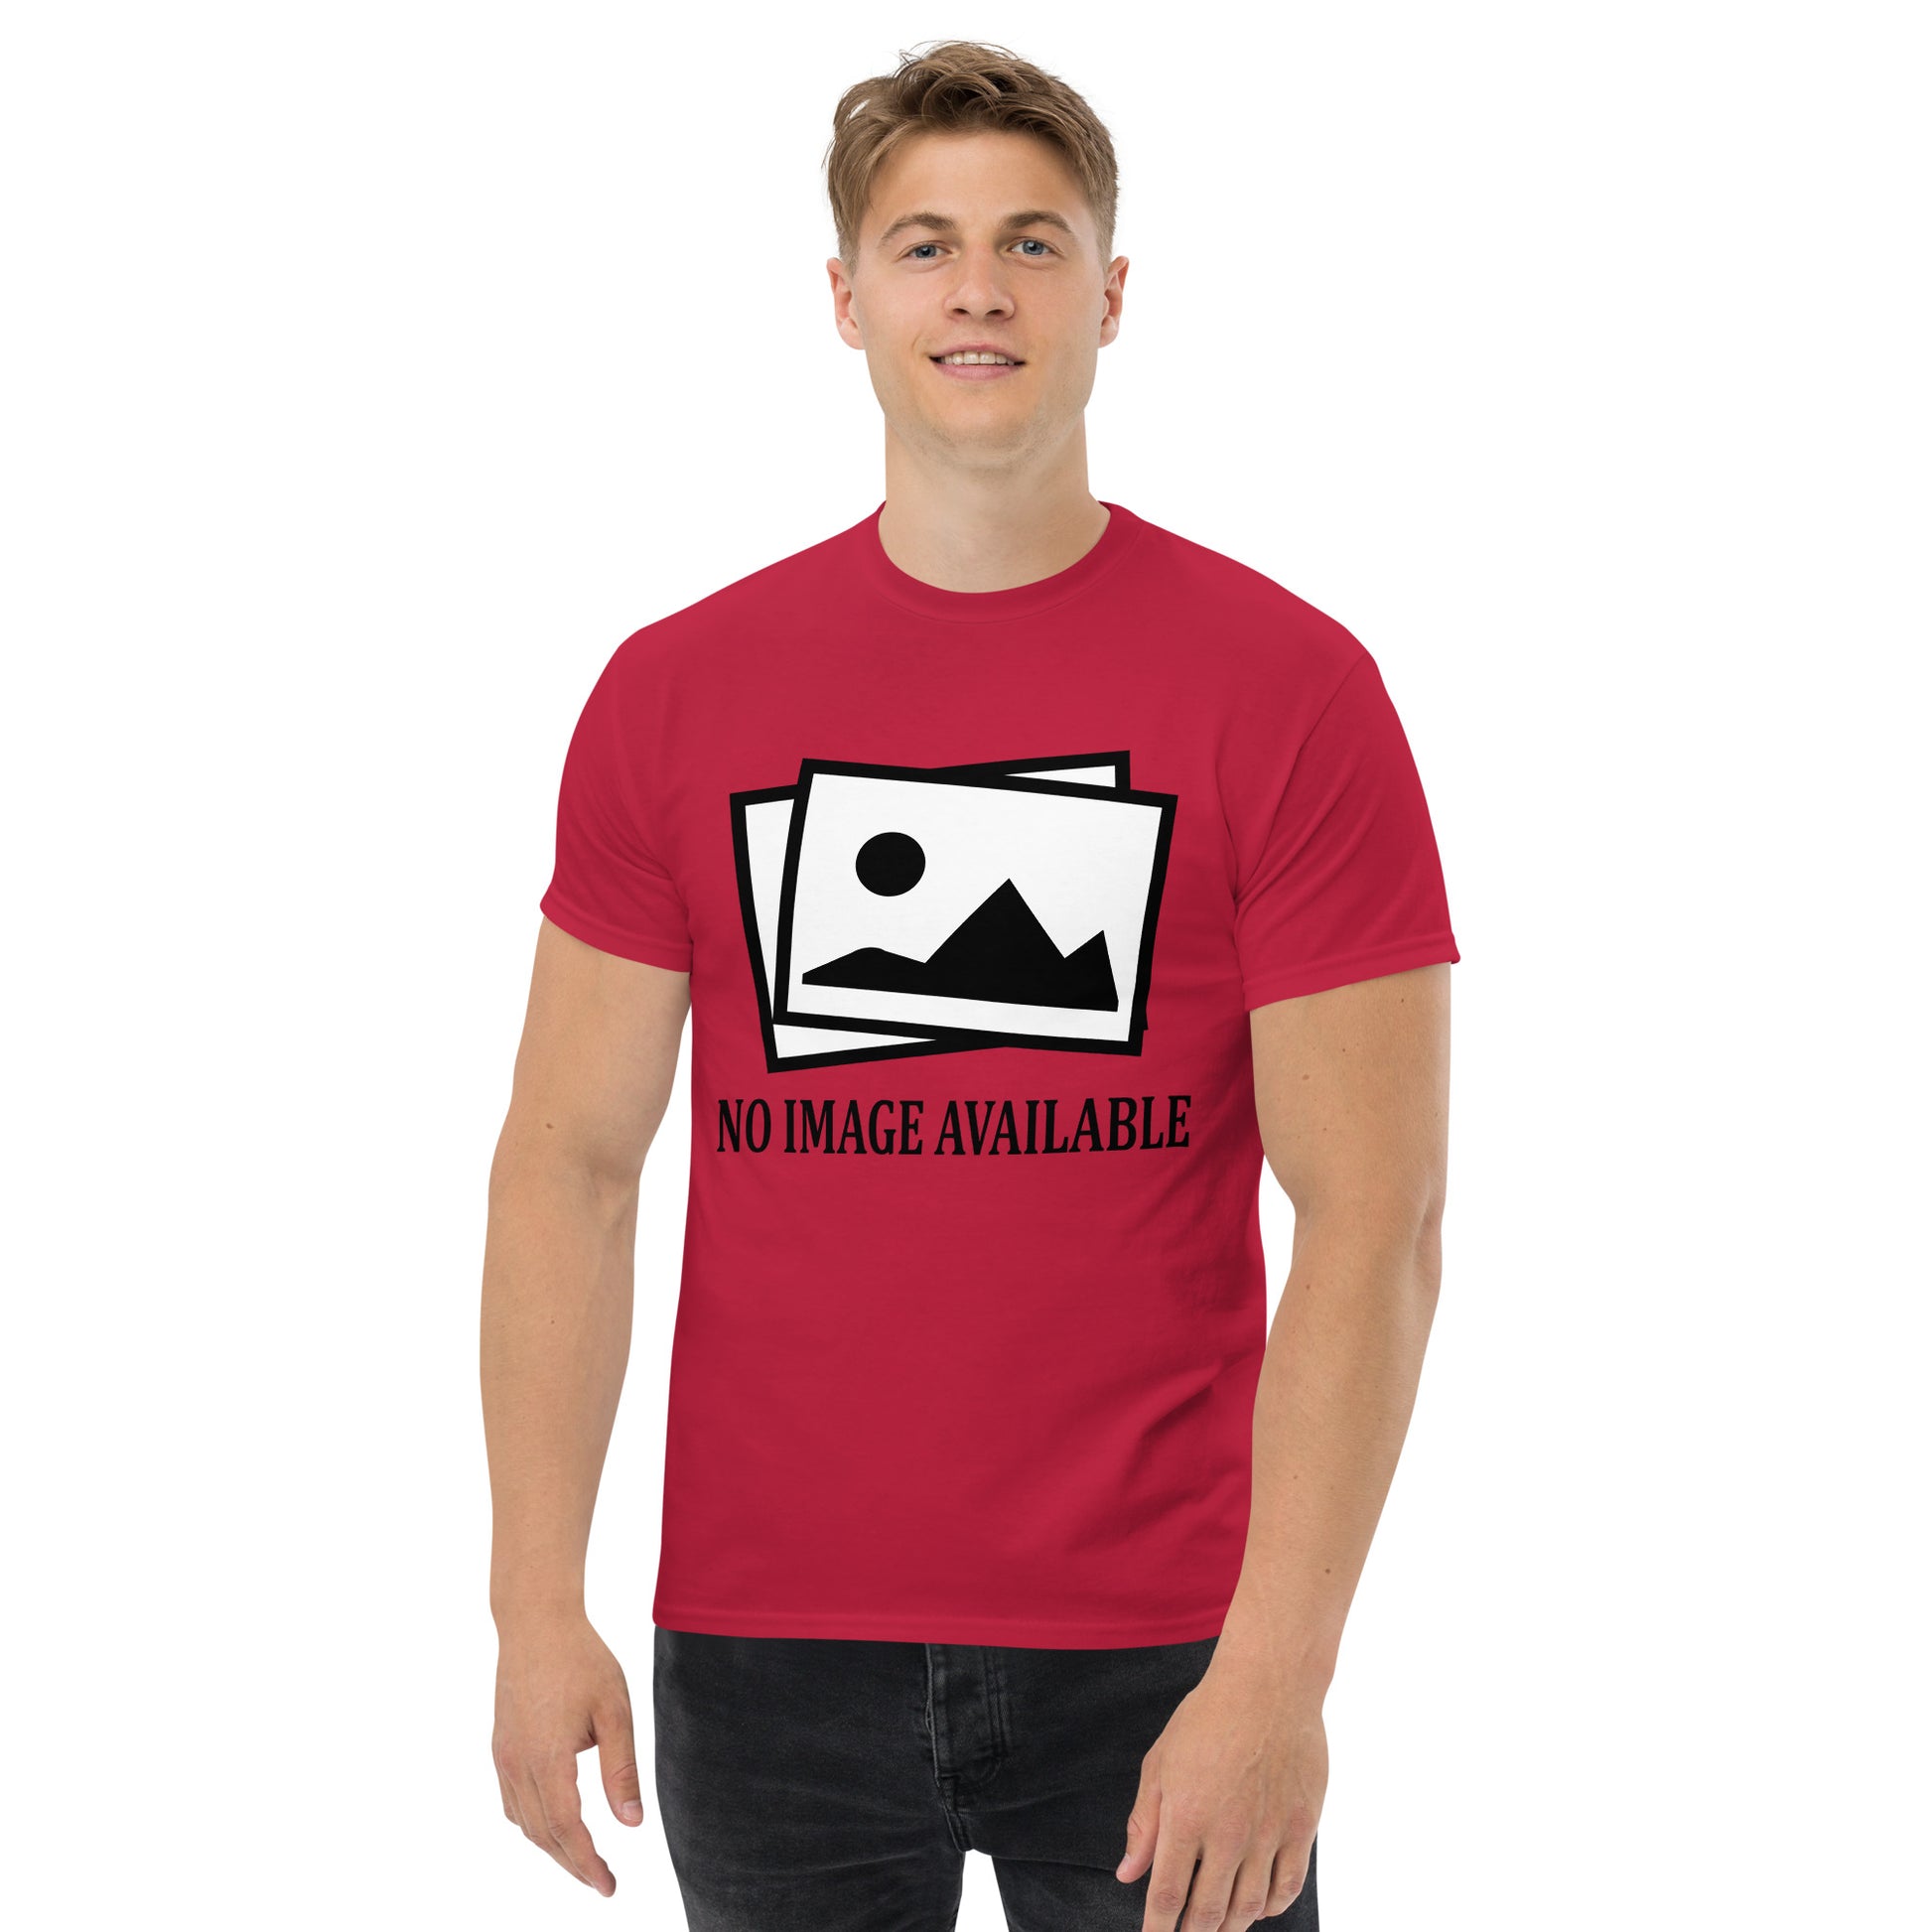 Men with carbinal red t-shirt with image and text "no image available"